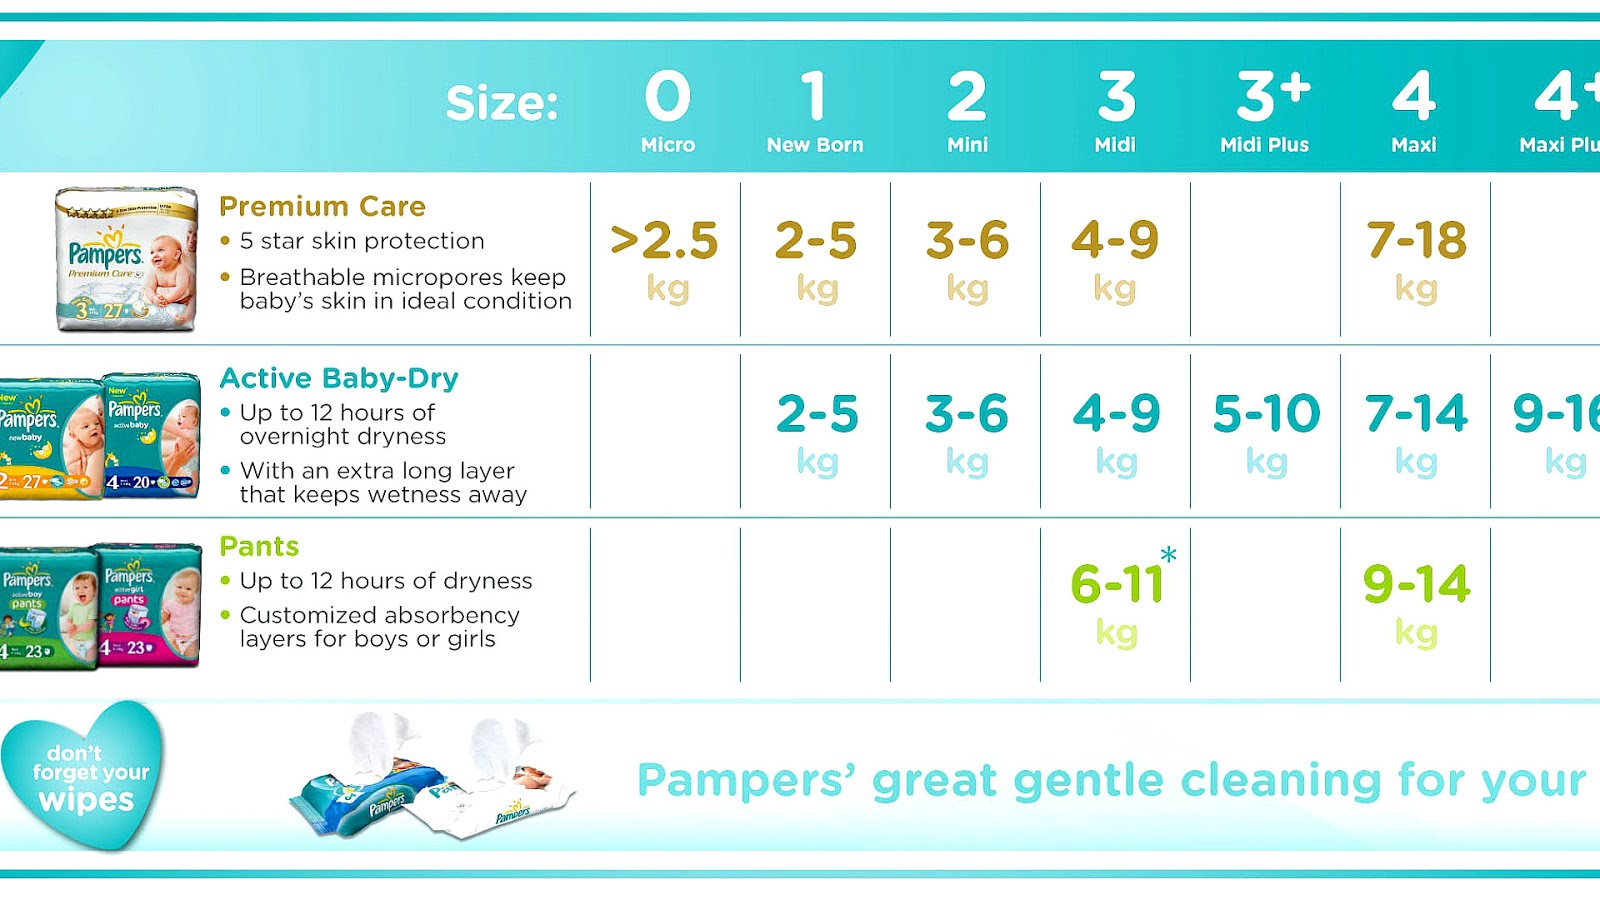 Pampers Diapers Size Guide